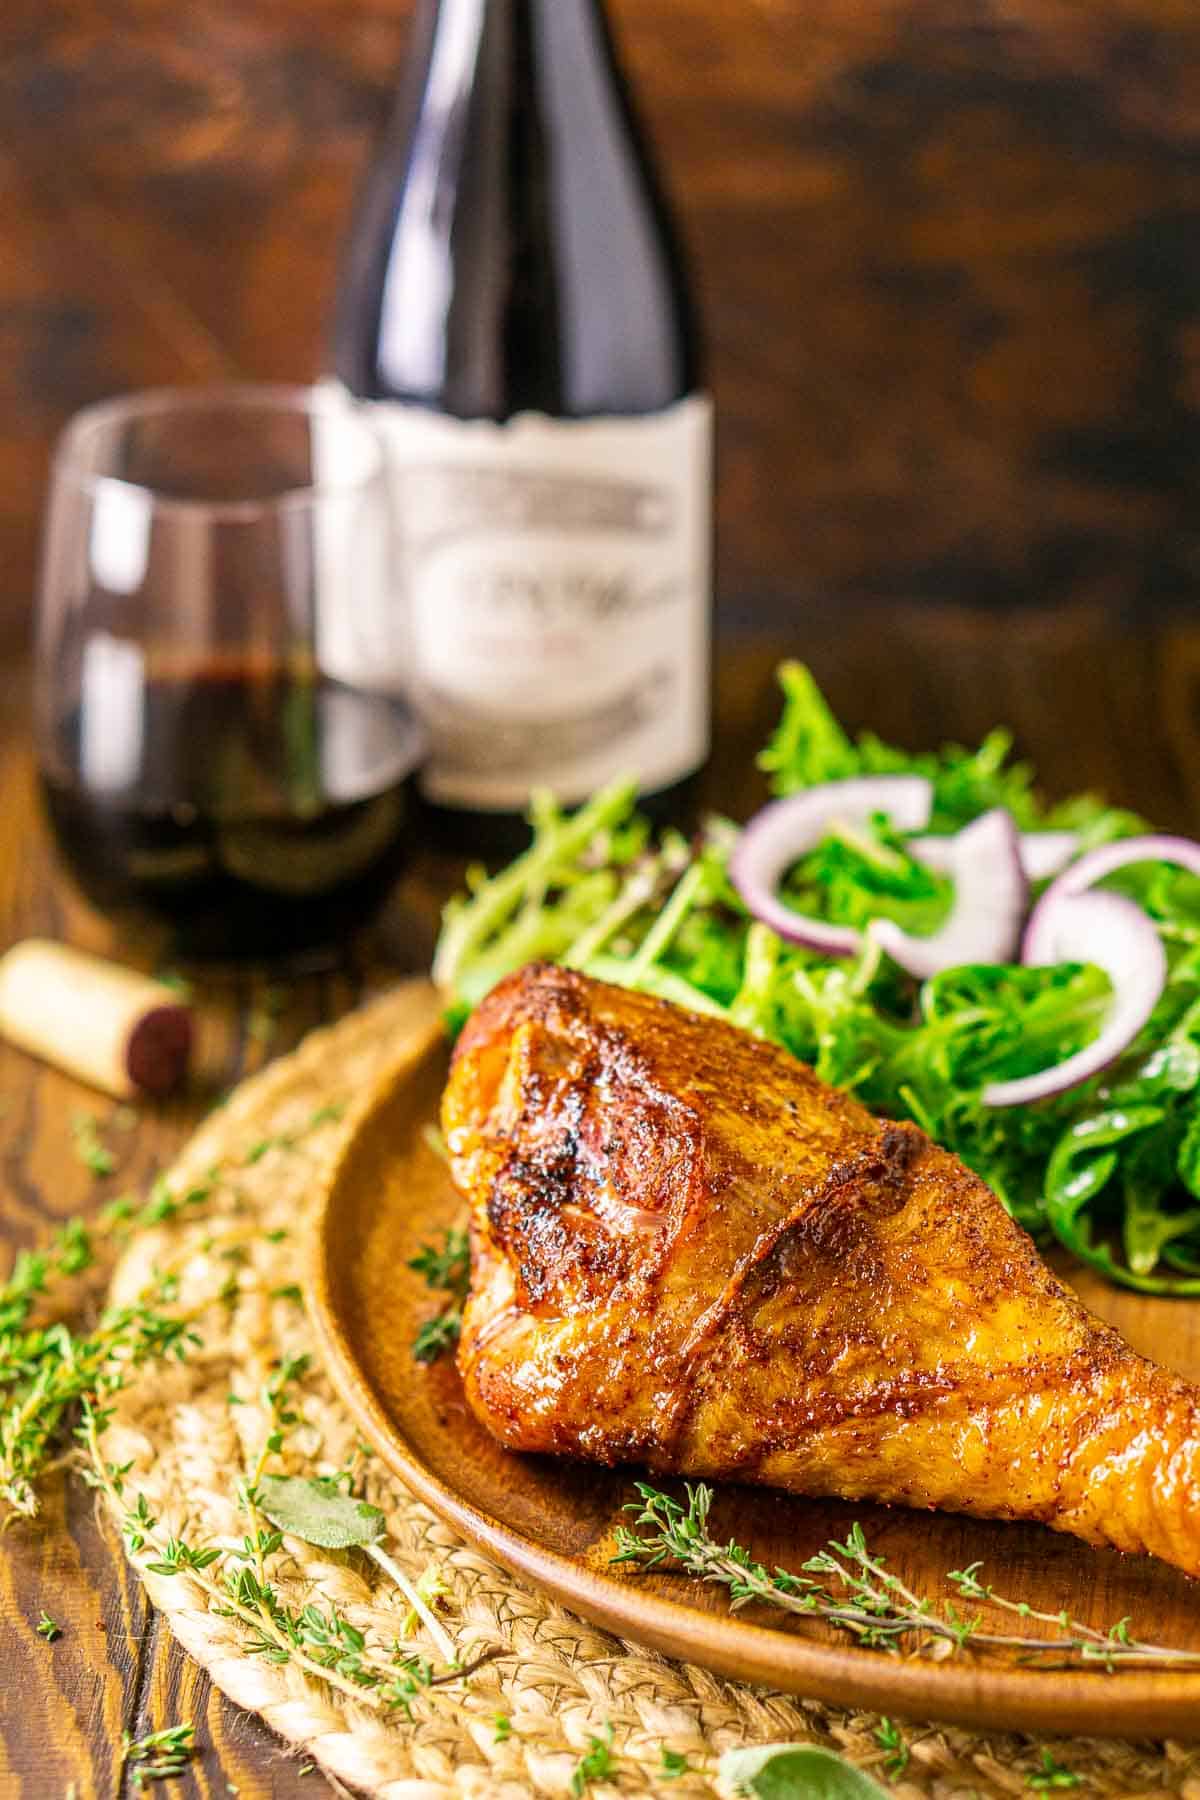 A smoked turkey leg on a wooden plate with a bottle and glass of pinot noir in the background and fresh herbs scattered around the table.